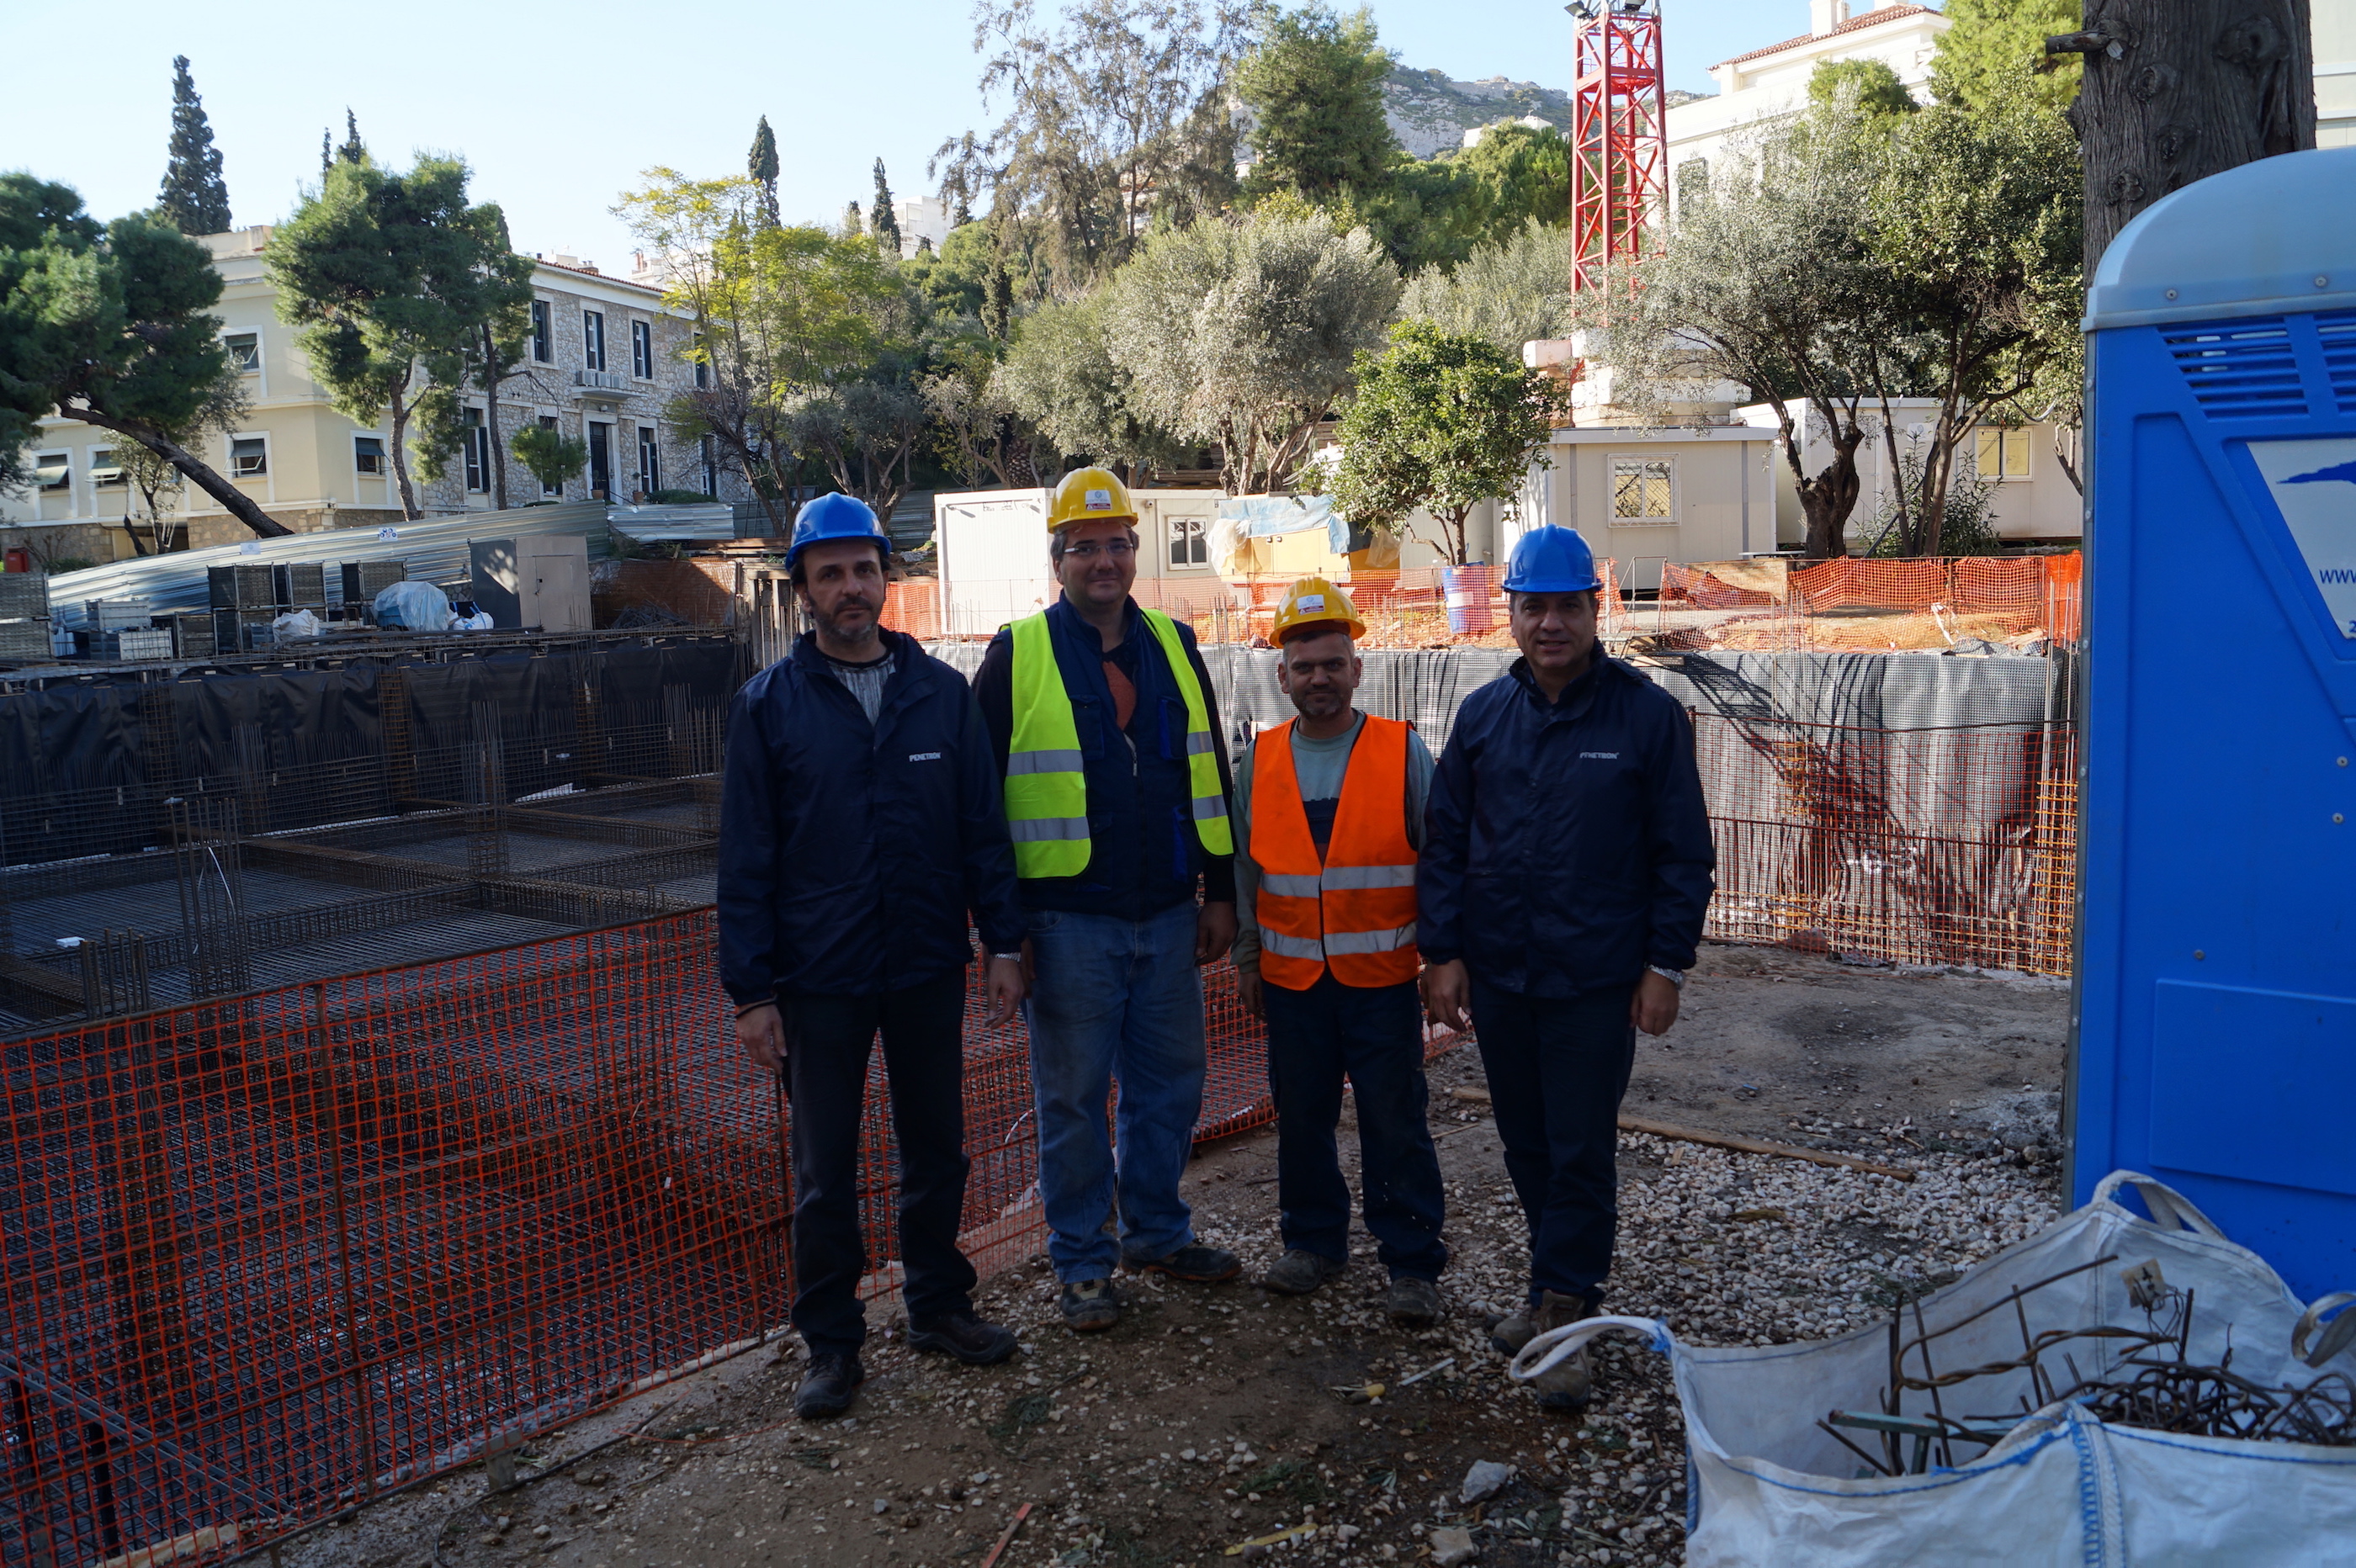 All clear: The PENETRON technical support team at the American School of Classical Studies Athens construction site (far right: Theodor Mentzikofakis, General Director of PENETRON Hellas).